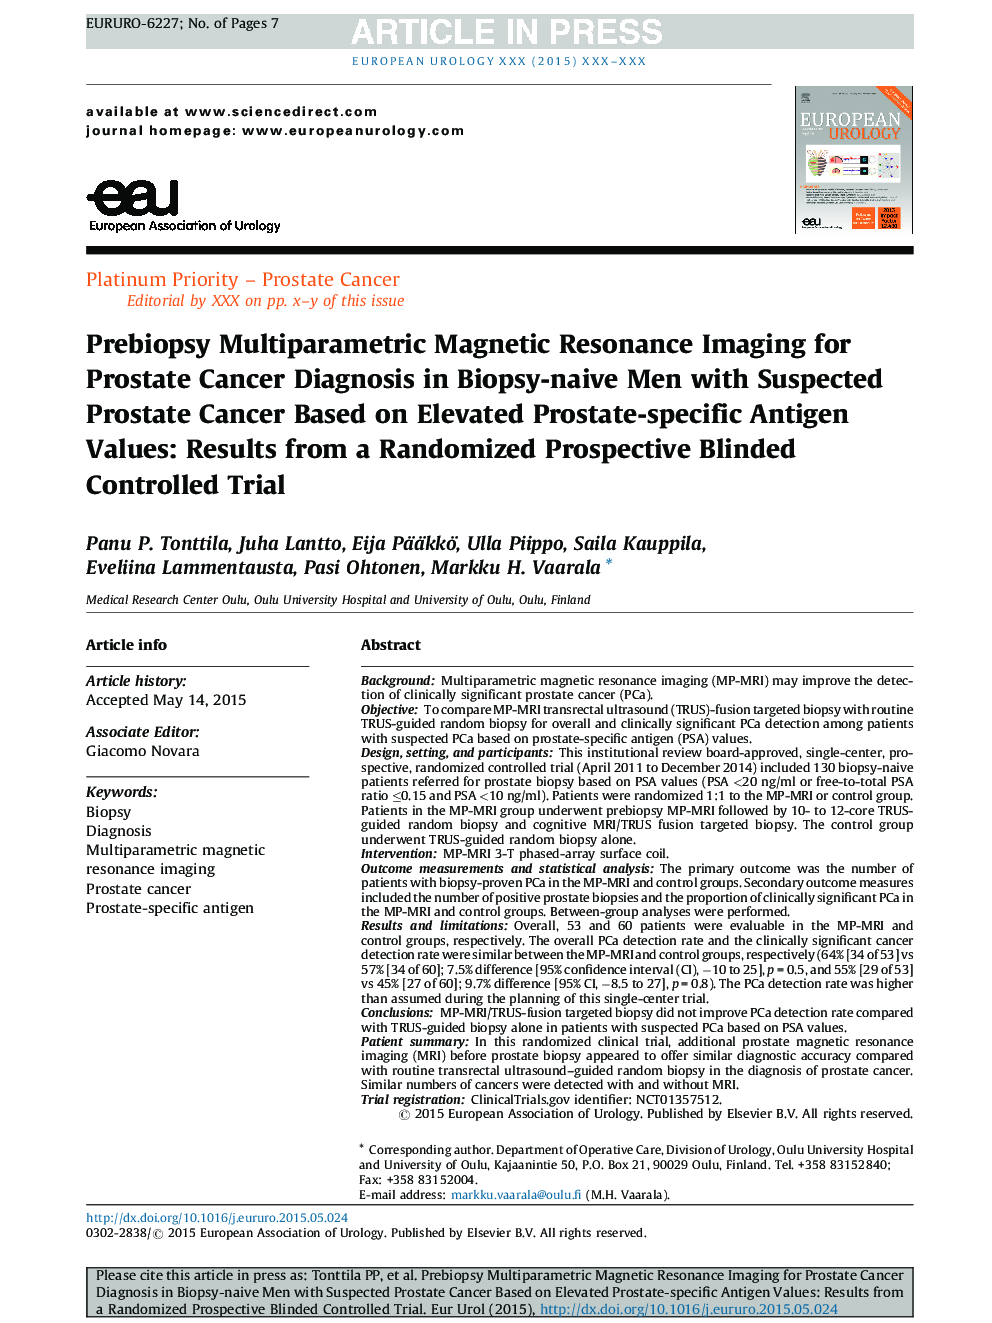 Prebiopsy Multiparametric Magnetic Resonance Imaging for Prostate Cancer Diagnosis in Biopsy-naive Men with Suspected Prostate Cancer Based on Elevated Prostate-specific Antigen Values: Results from a Randomized Prospective Blinded Controlled Trial